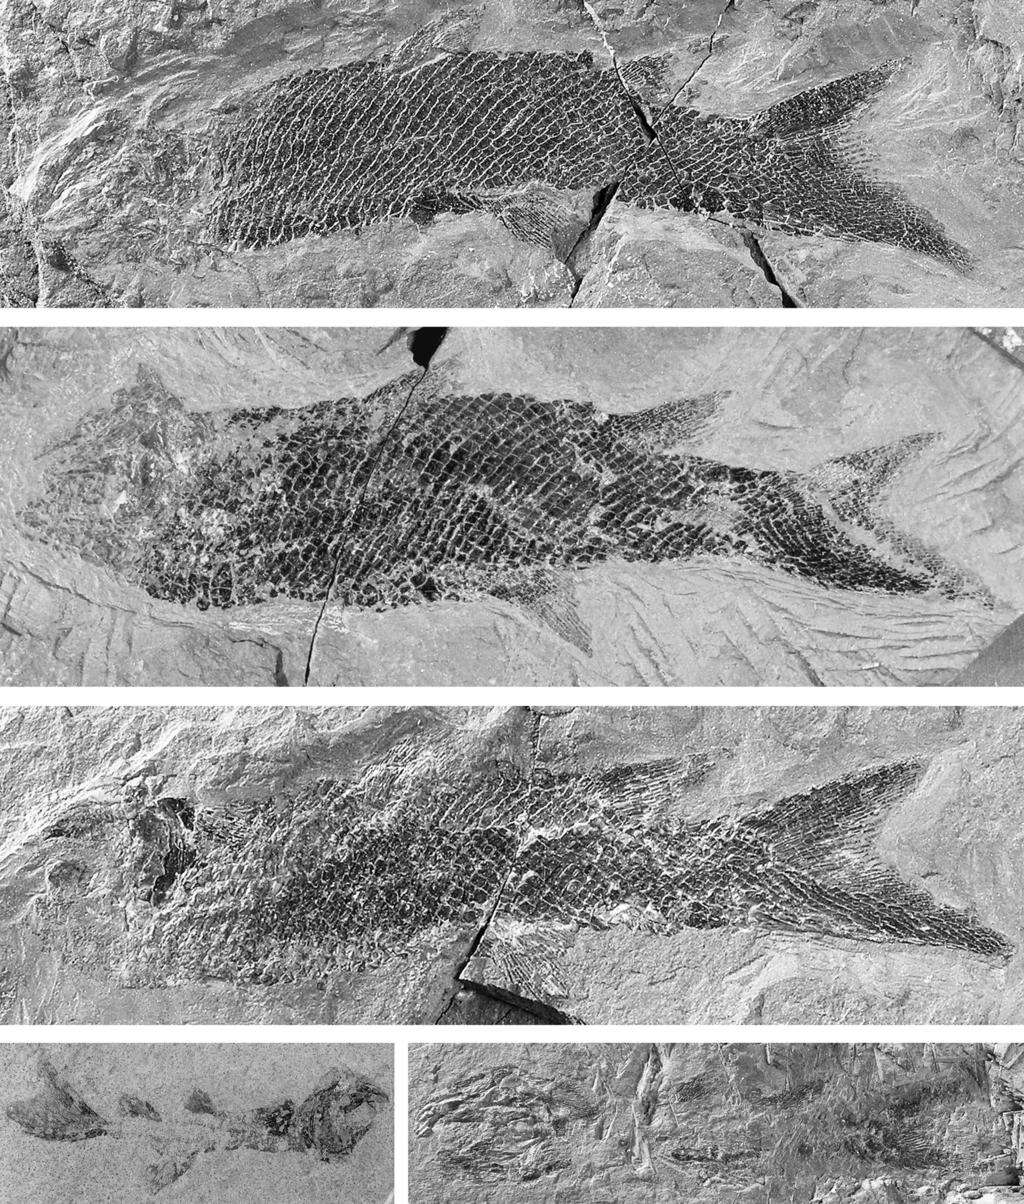 Stanislav tamberg A new aeduellid actinopterygian from the Lower Permian of the Krkono e Piedmont Basin A B C D E Figure 13. Neslovicella elongata sp. nov. Scale bars represent 10 mm.